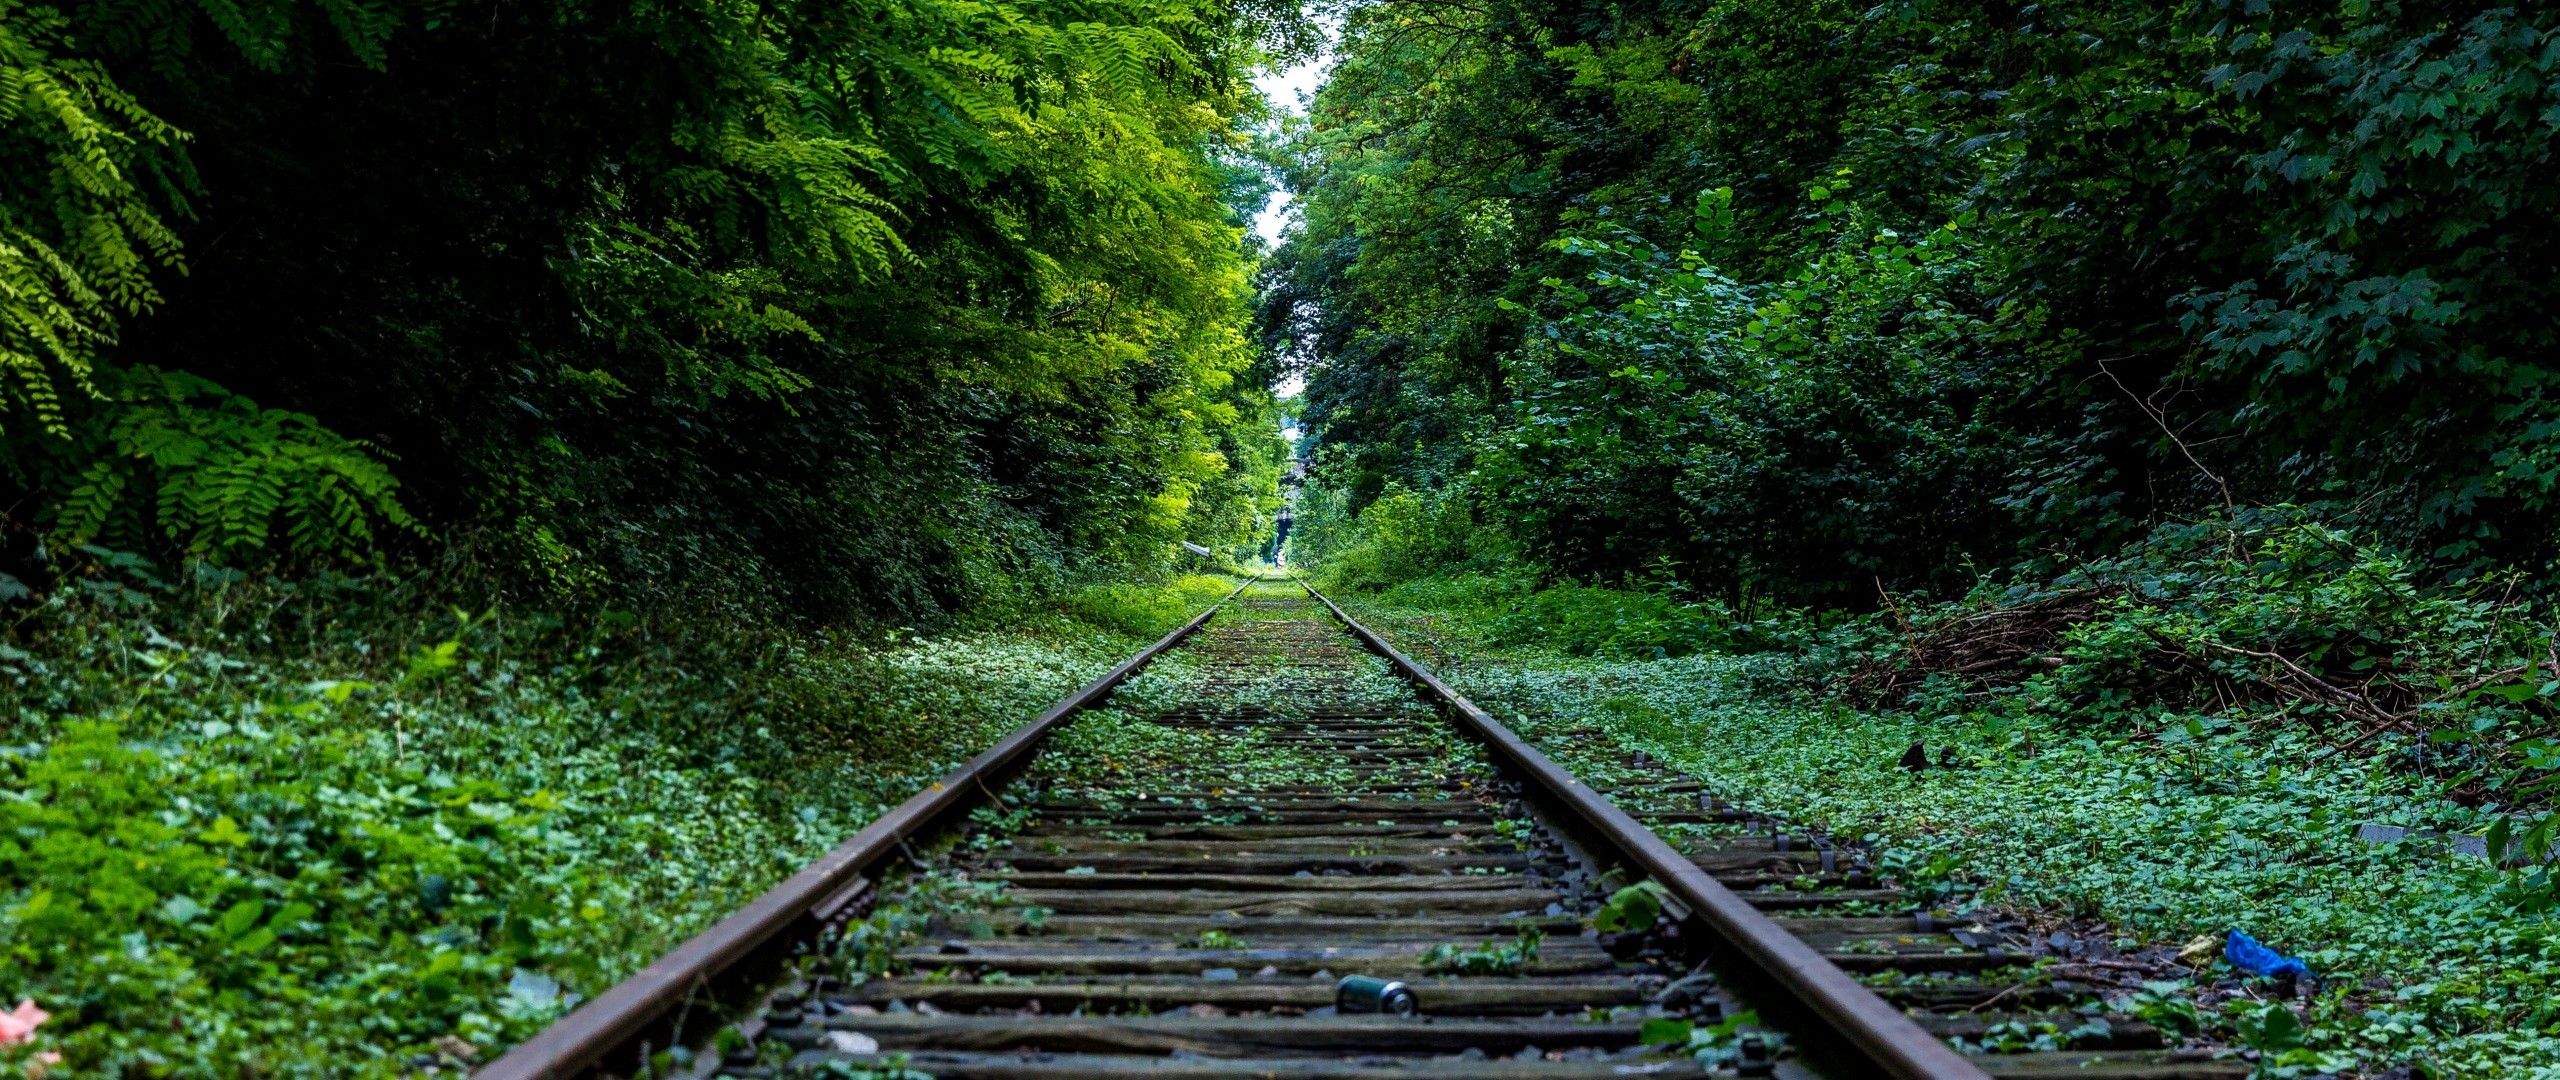 General 2560x1080 railway forest green abandoned outdoors